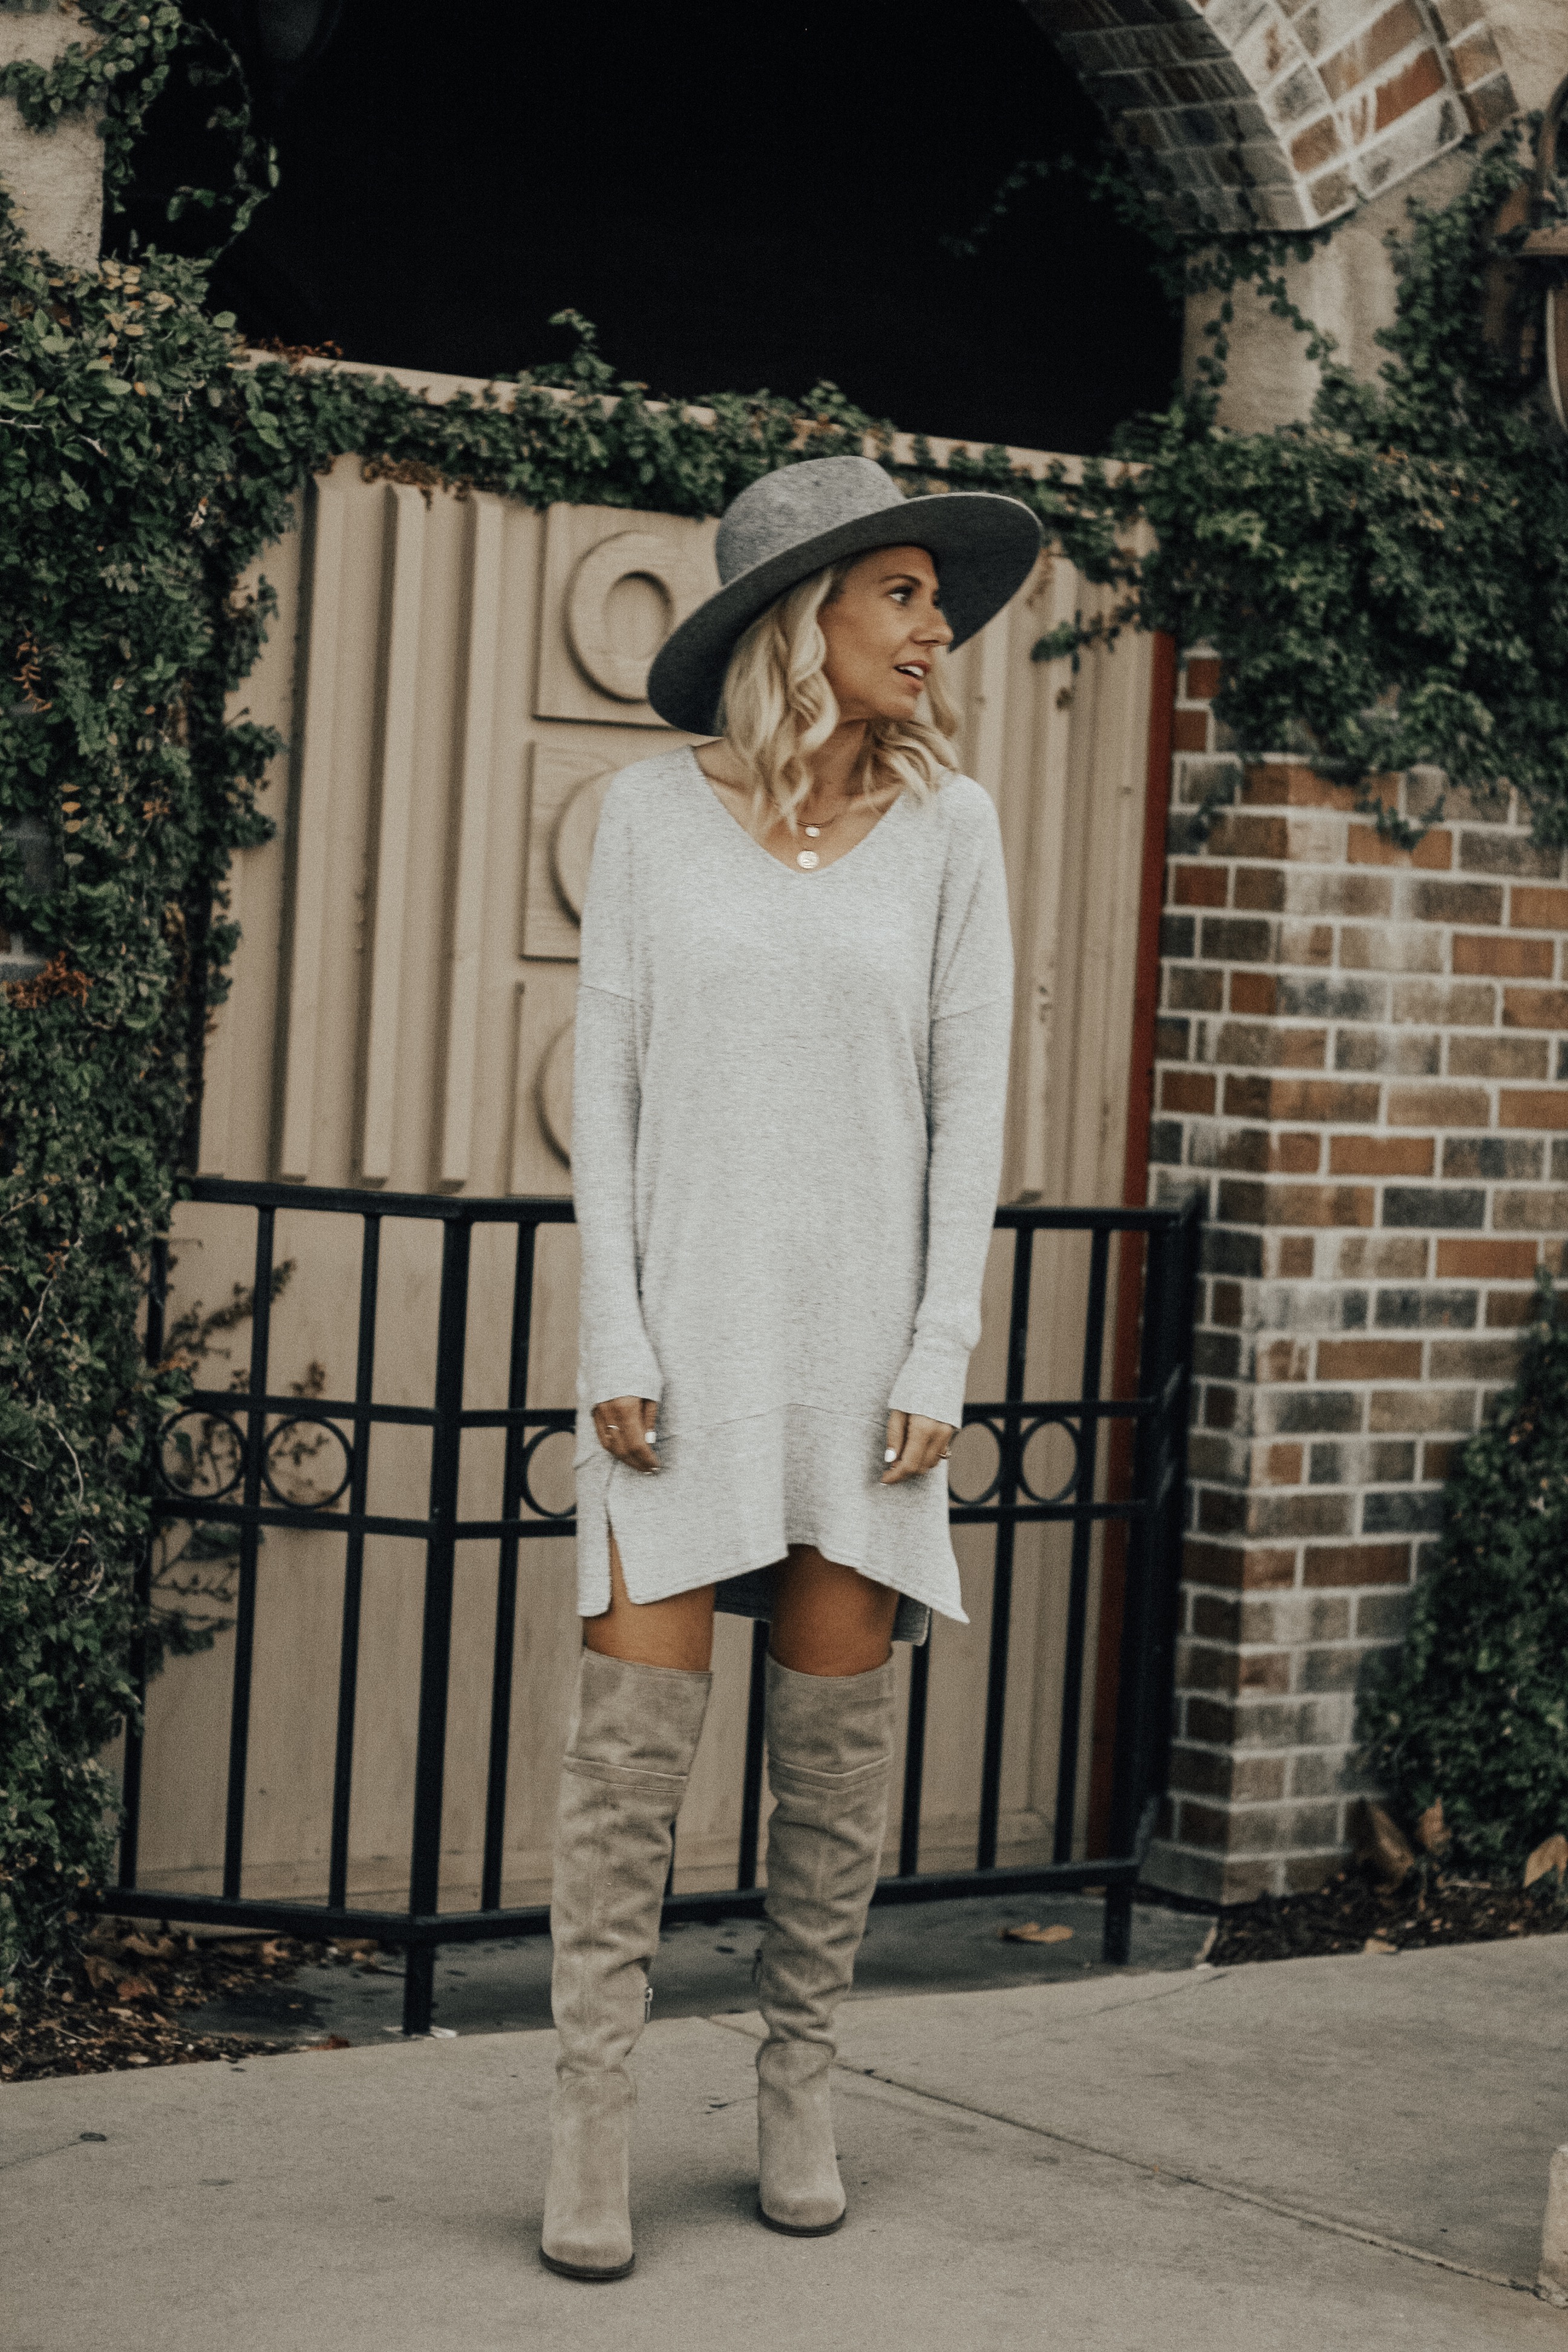 BLACK FRIDAY & CYBER MONDAY SALES- Jaclyn De Leon Style + online shopping + thanksgiving + daily deals + sale alert + target + american eagle + abercrombie + express + nordstrom + OTK boots + sweater dress + street style + fall outfit inspiration + holiday look + christmas shopping + gift giving + sale alert